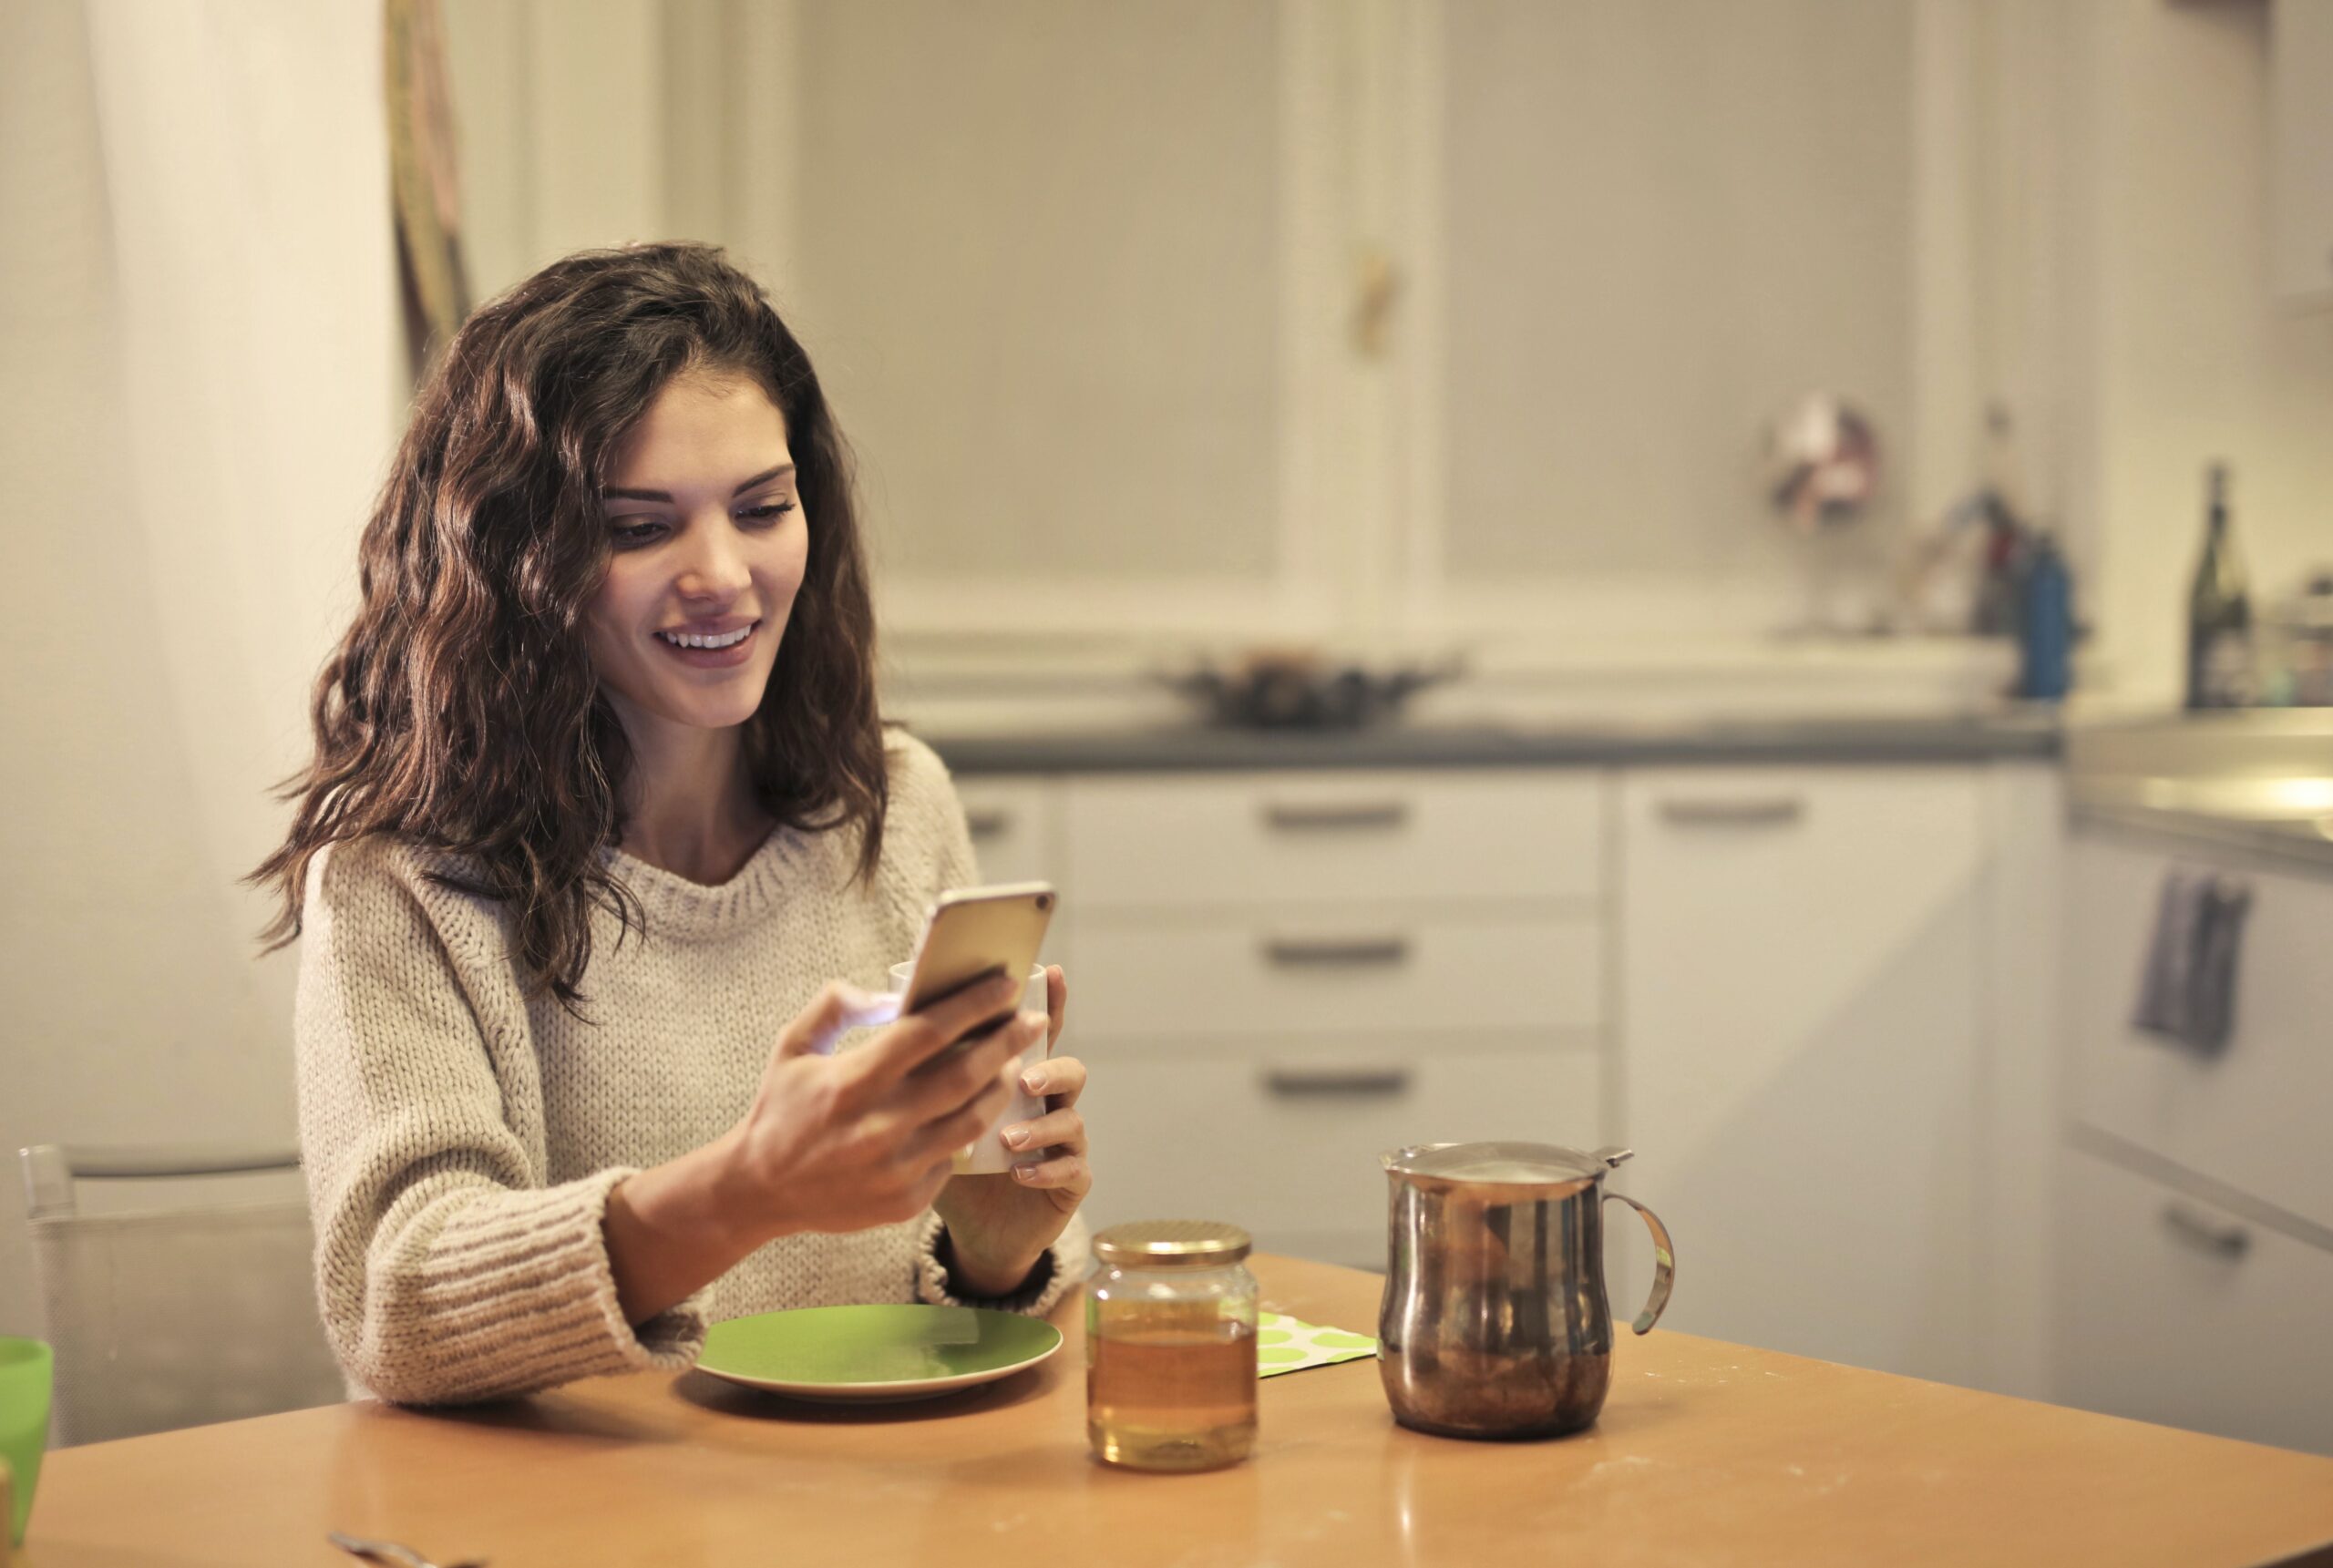 woman smiling looking at phone in kitchen